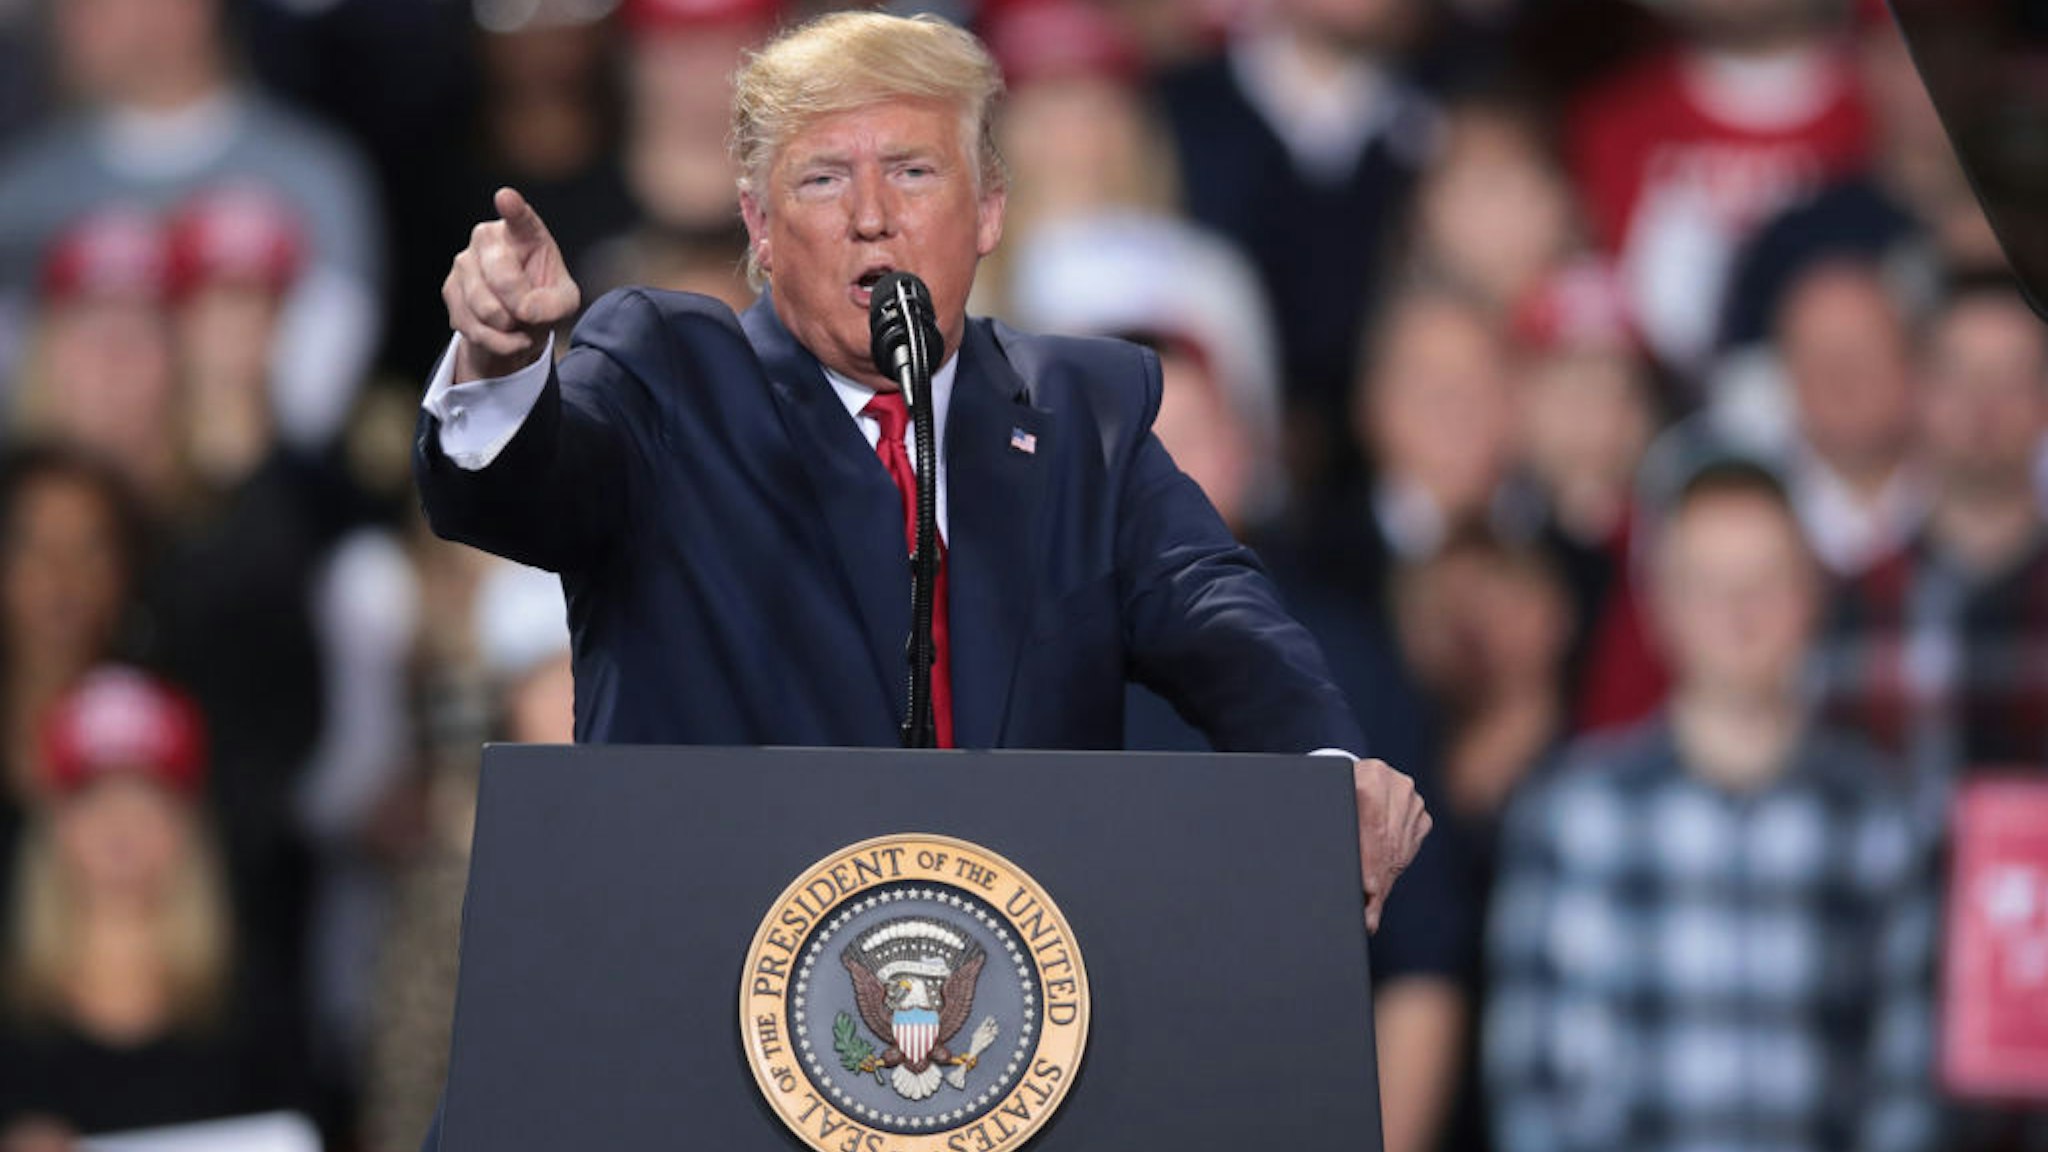 President Donald Trump addresses his impeachment during a Merry Christmas Rally at the Kellogg Arena on December 18, 2019 in Battle Creek, Michigan.